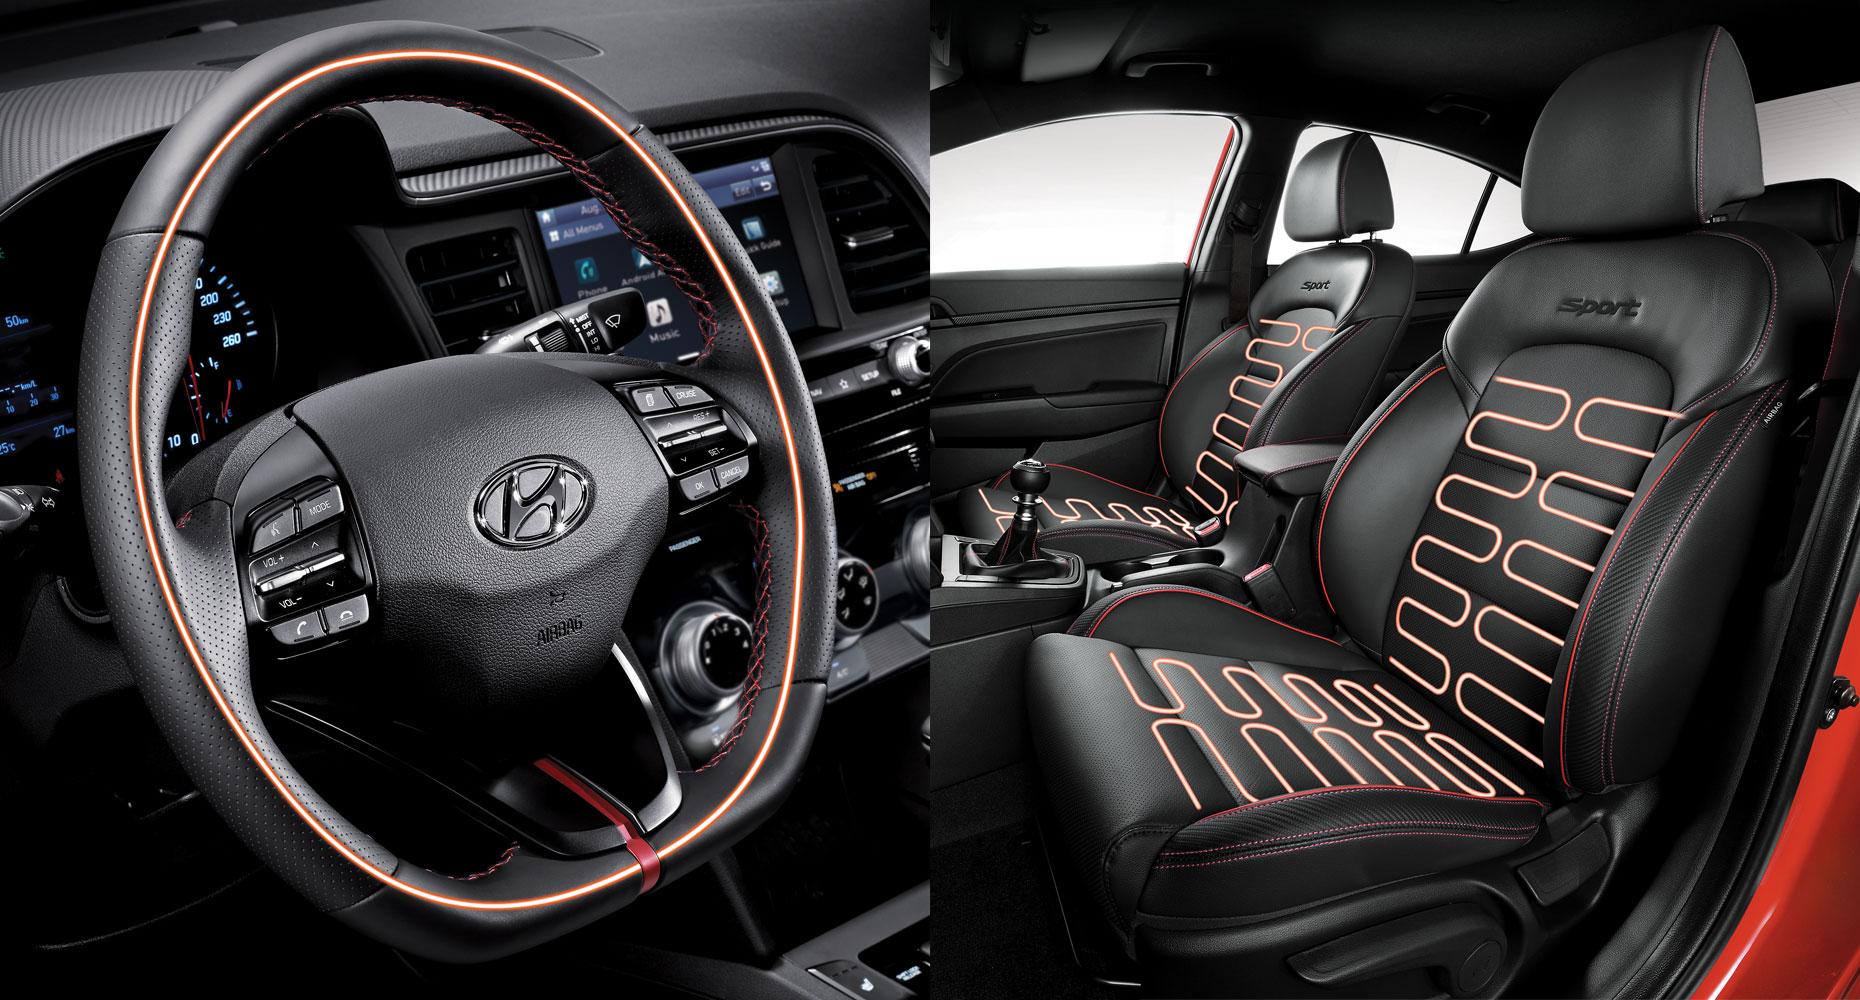 Heated front seats and heated steering wheel